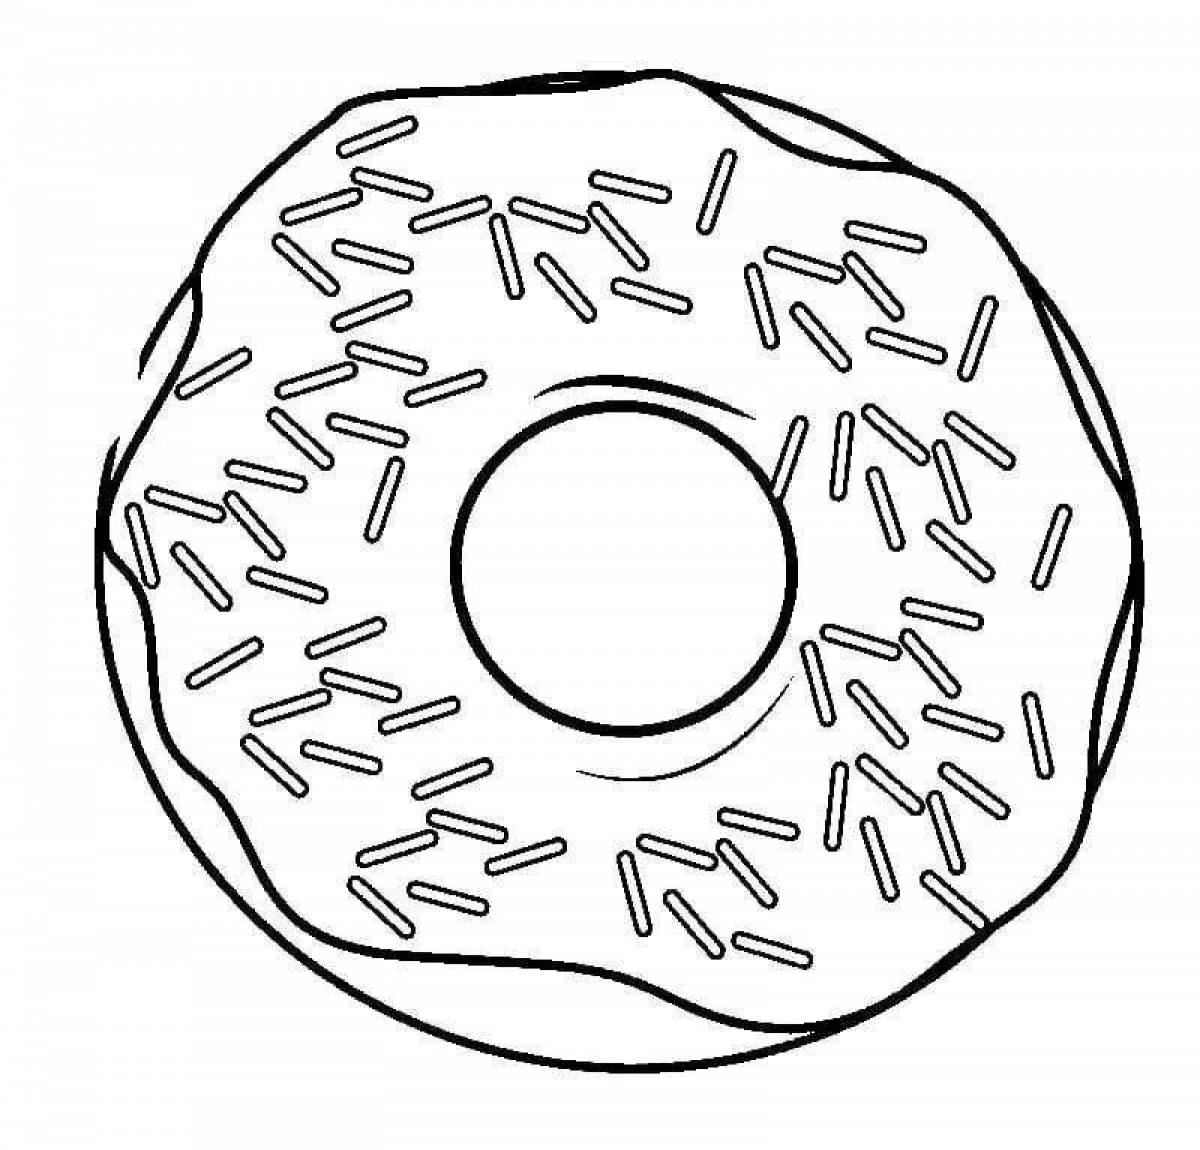 Cute donut coloring for kids